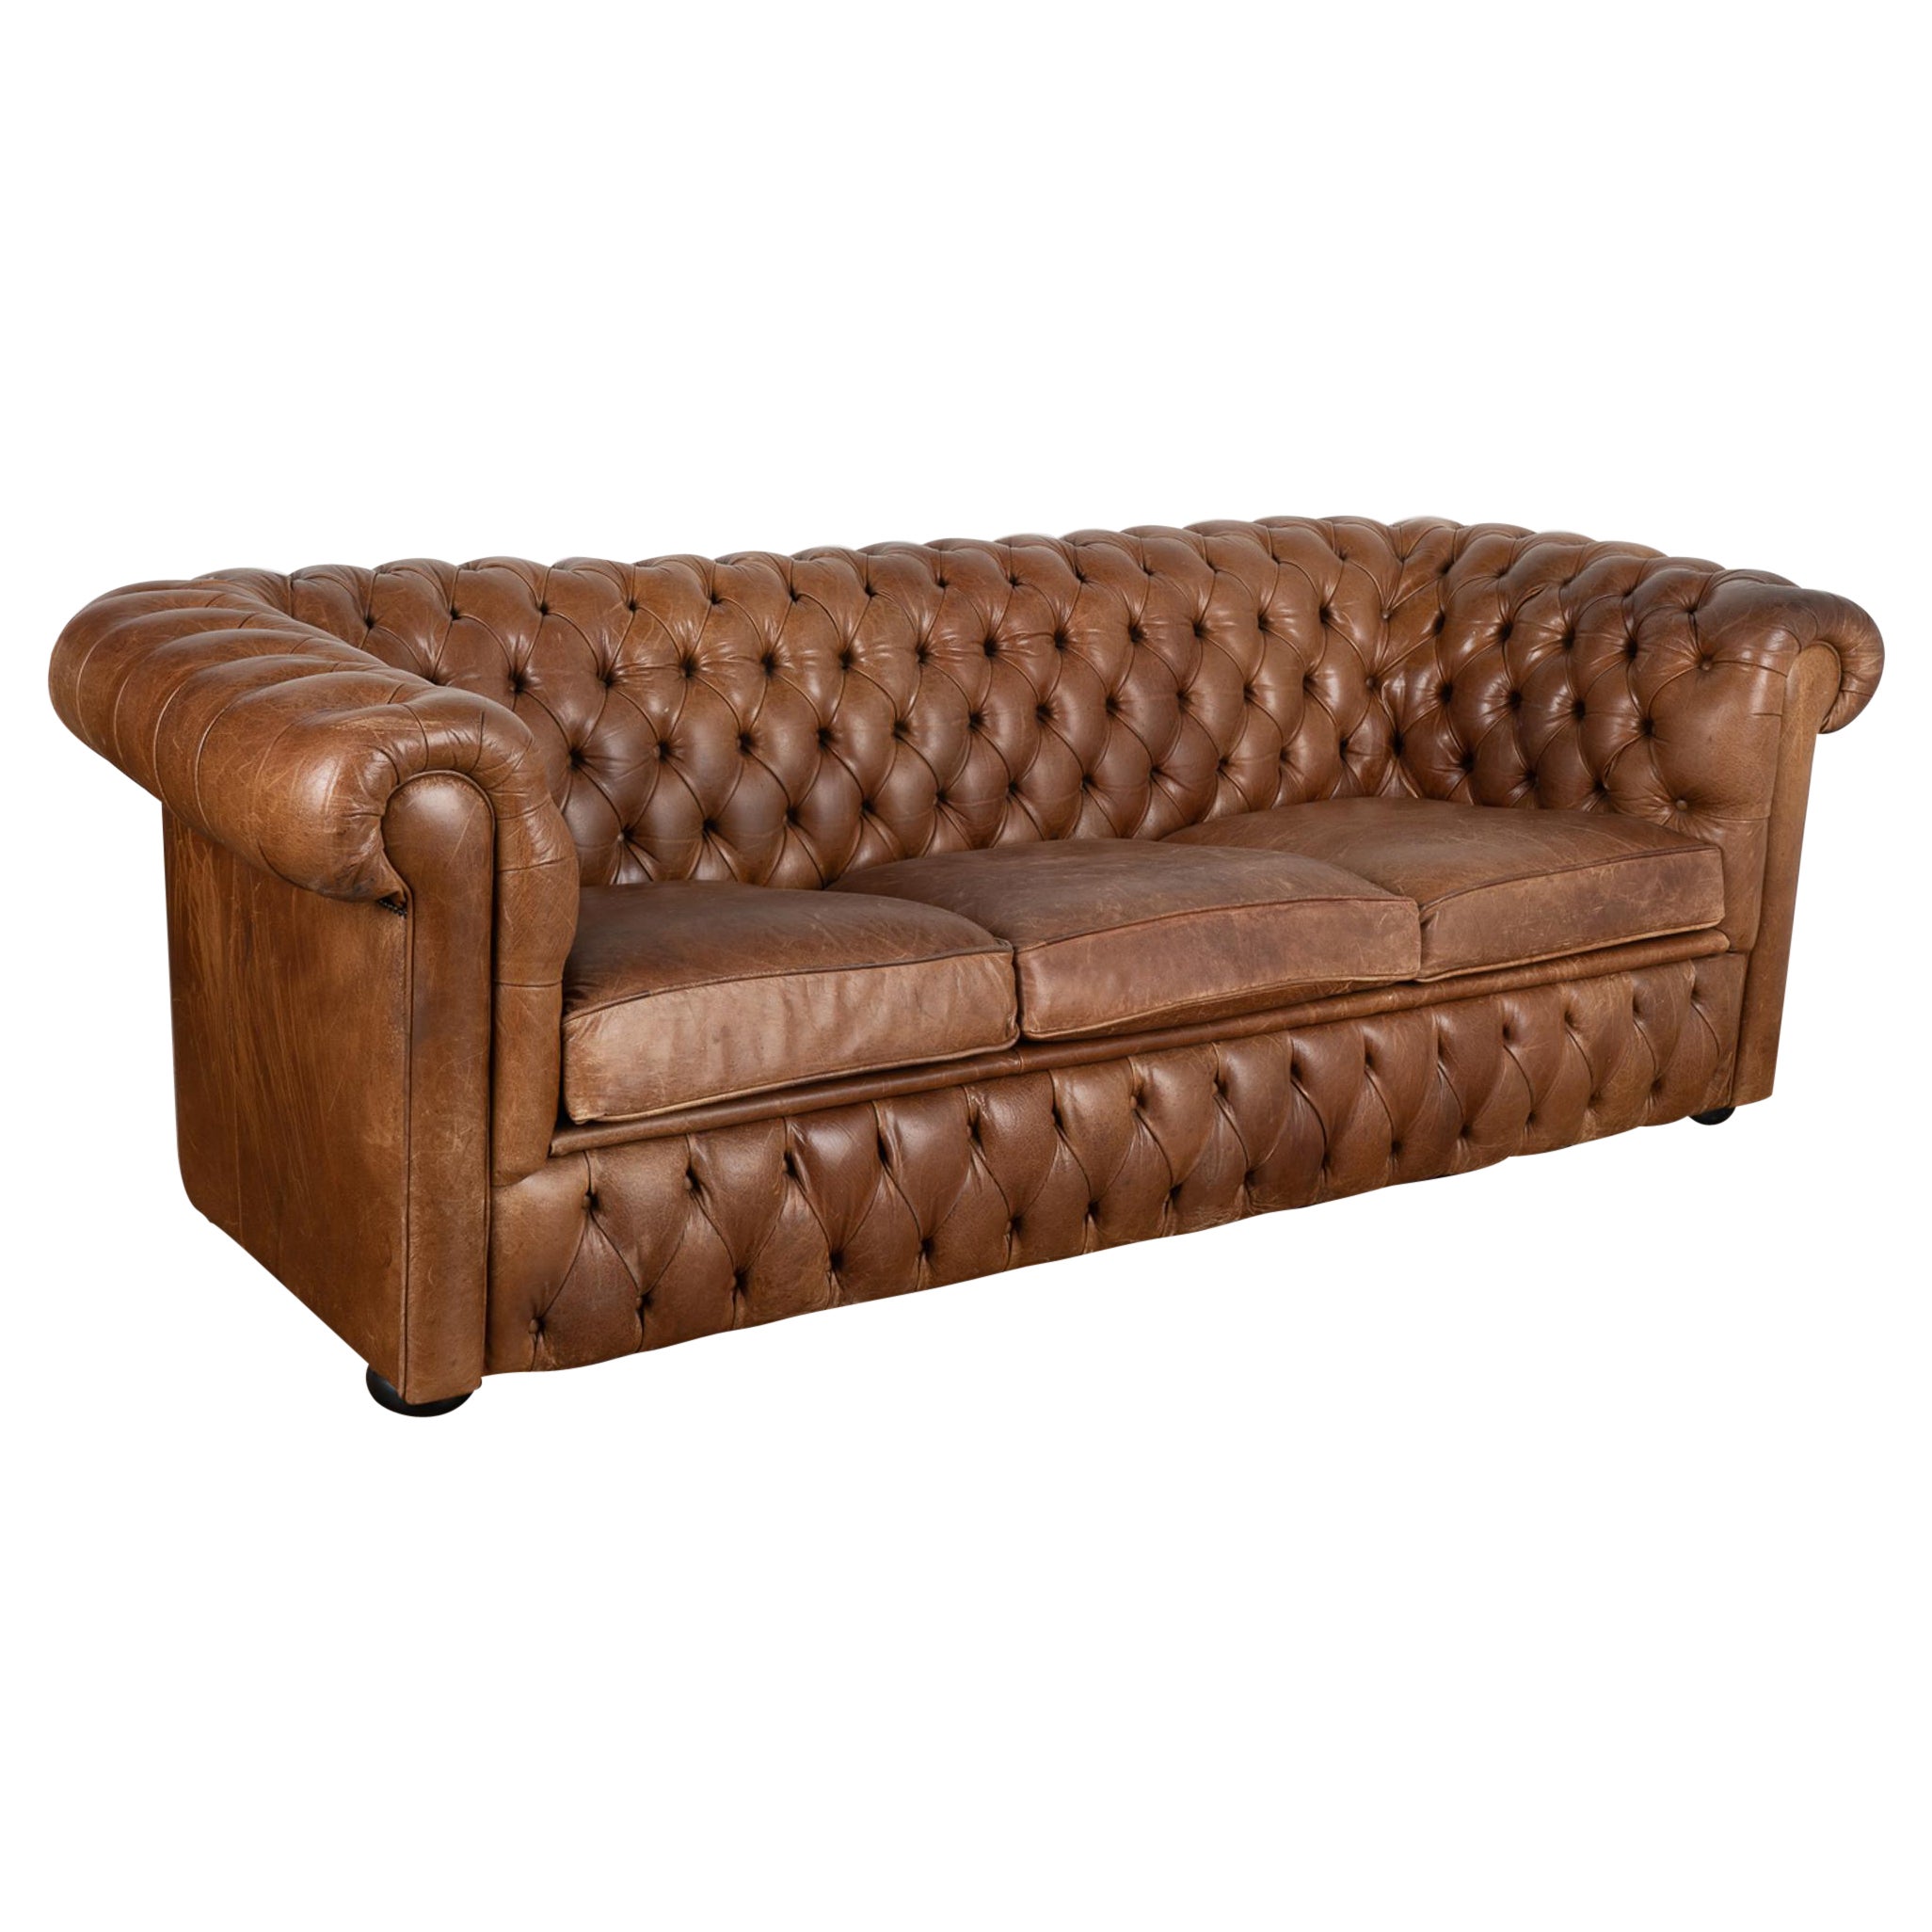 Vintage Brown Leather Three Seat Chesterfield Sofa, Denmark circa 1960-70 For Sale